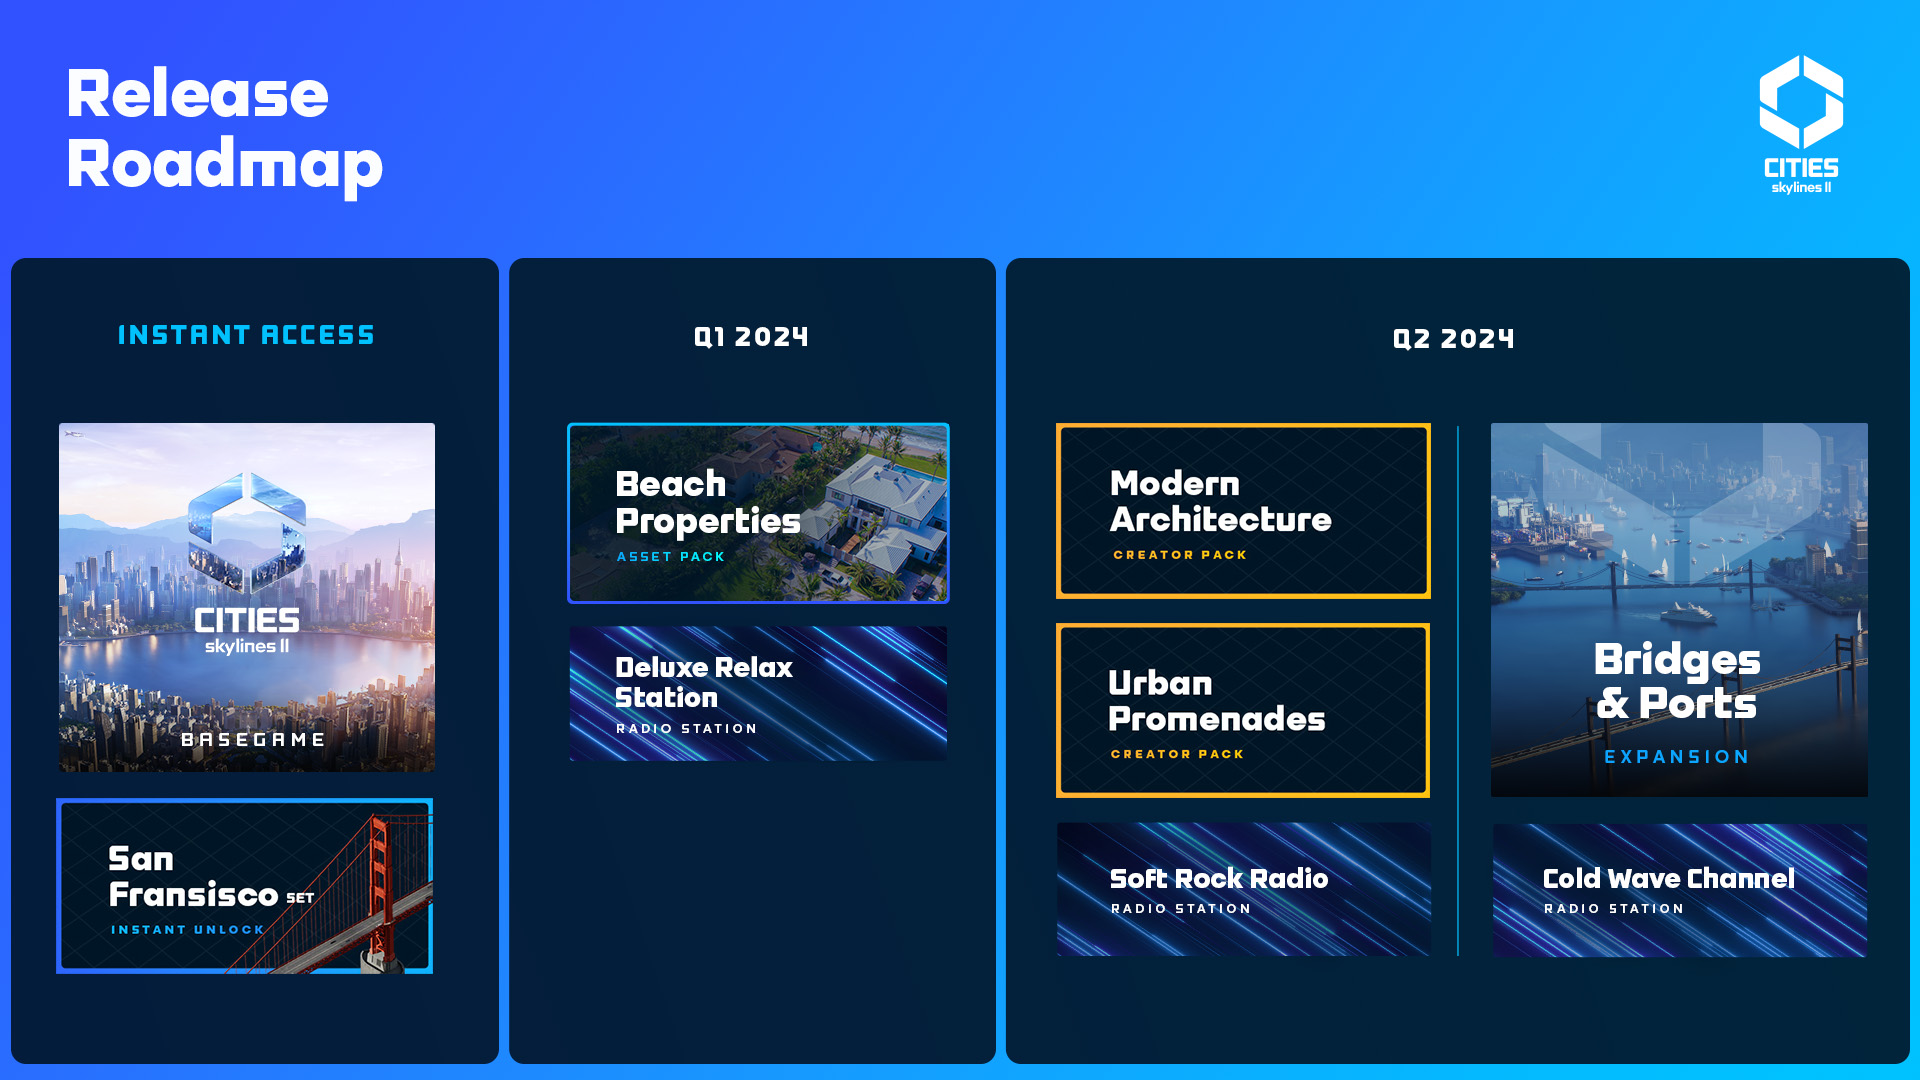 Cities Skylines 2 expansion pass release roadmap